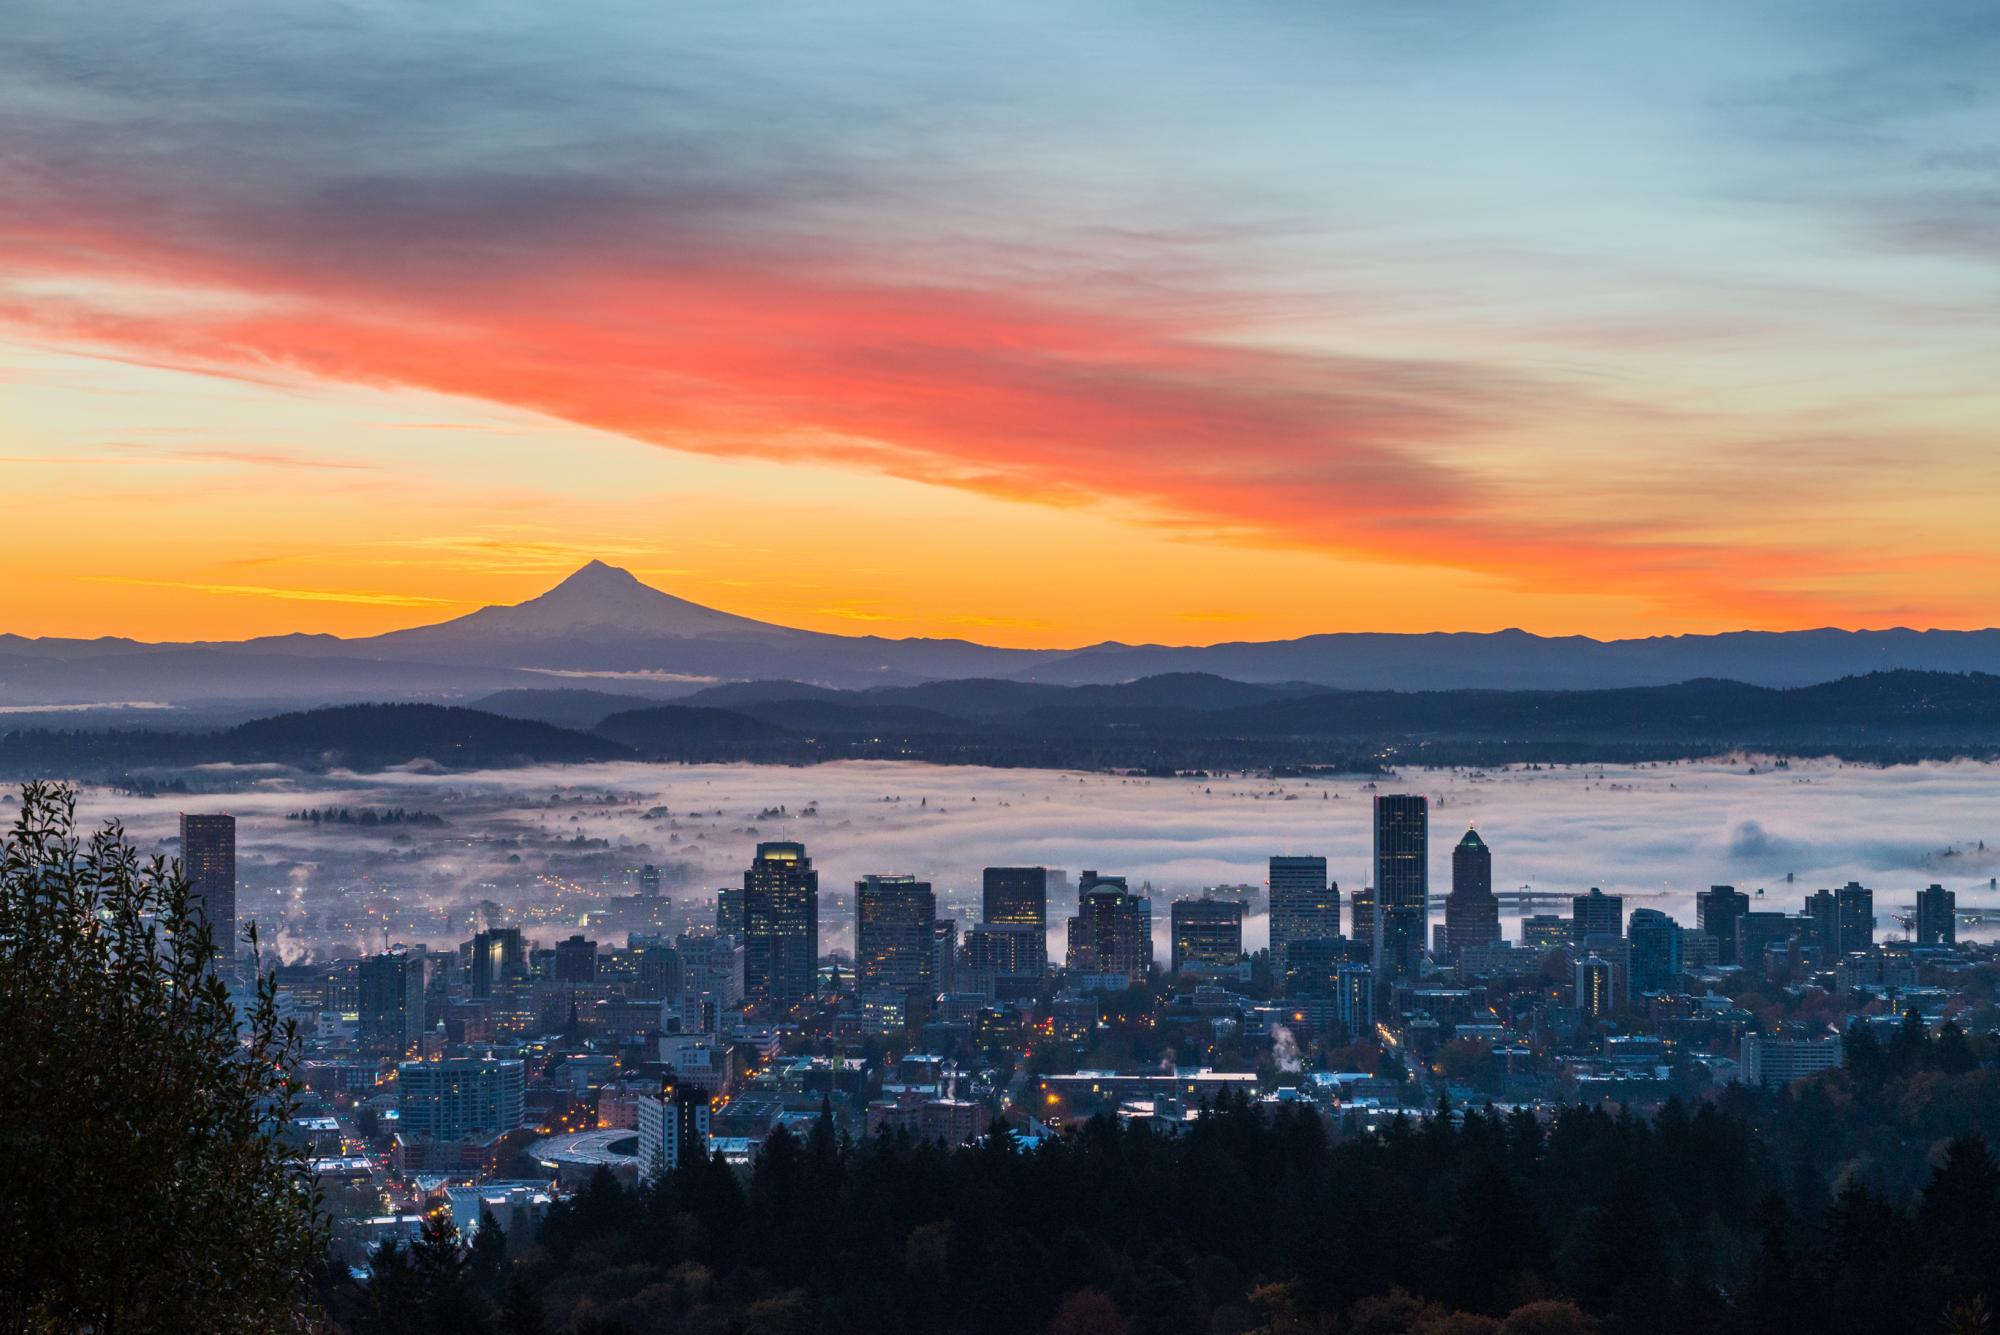 View of city of Portland at sunset and Mt. Hood